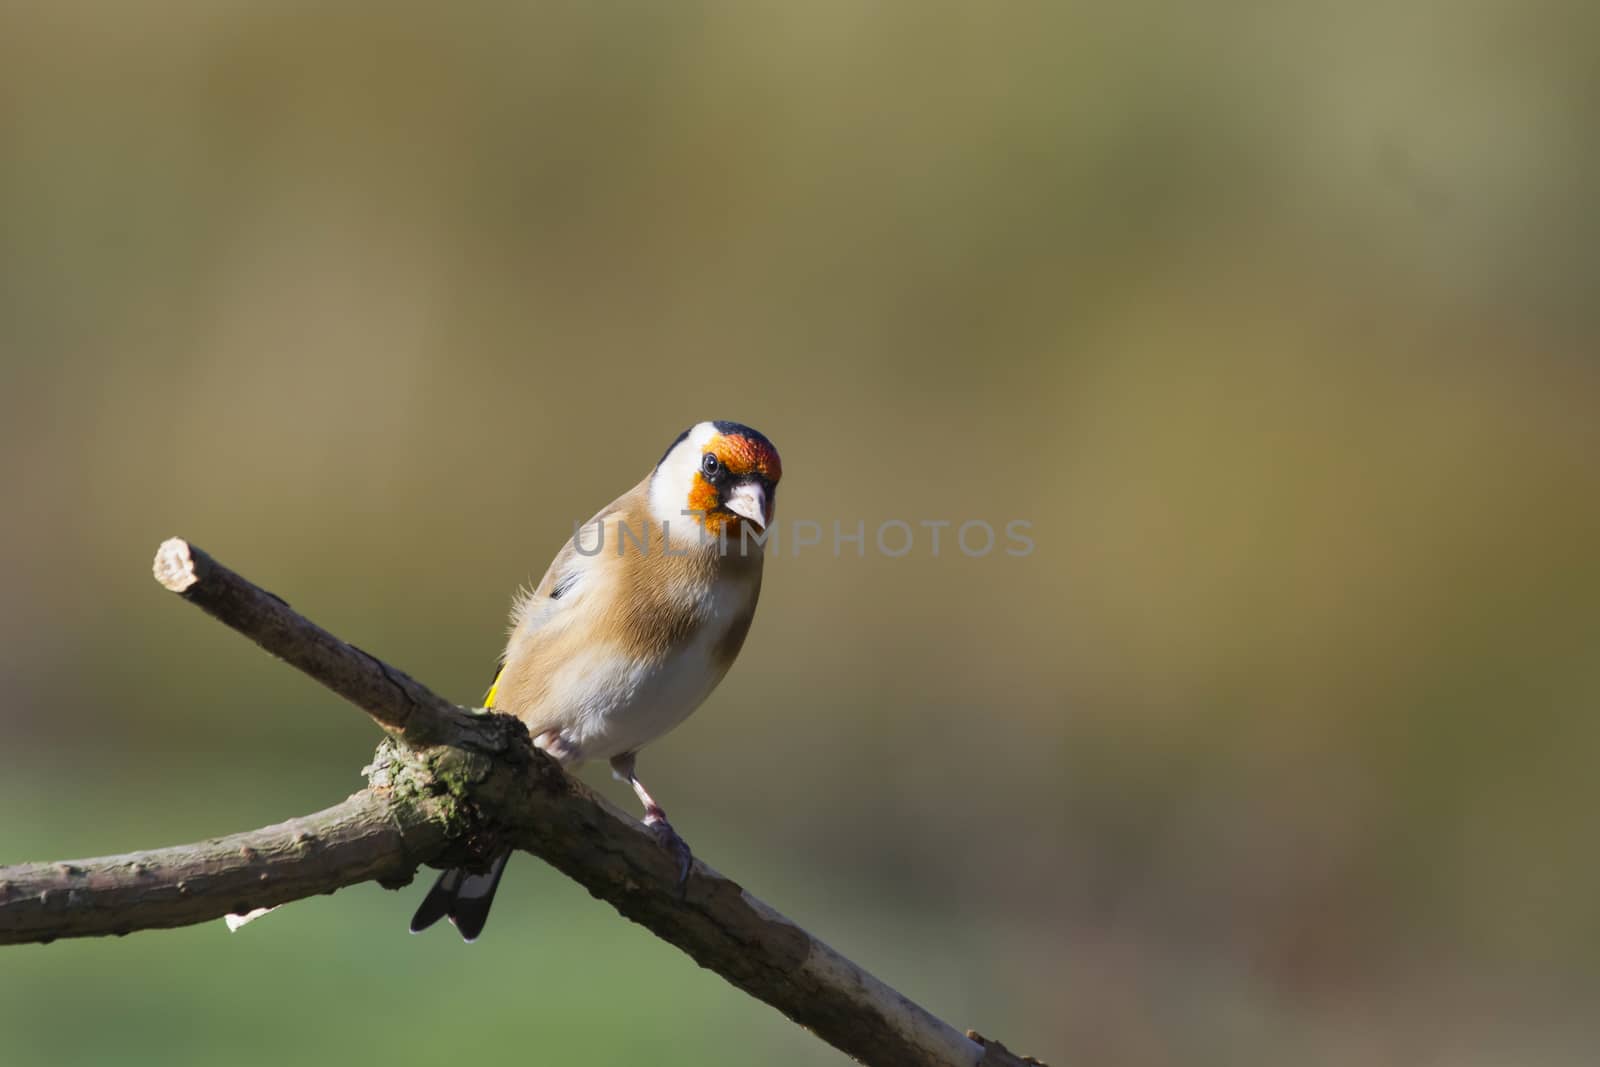 Goldfinch perched on a branch in winter